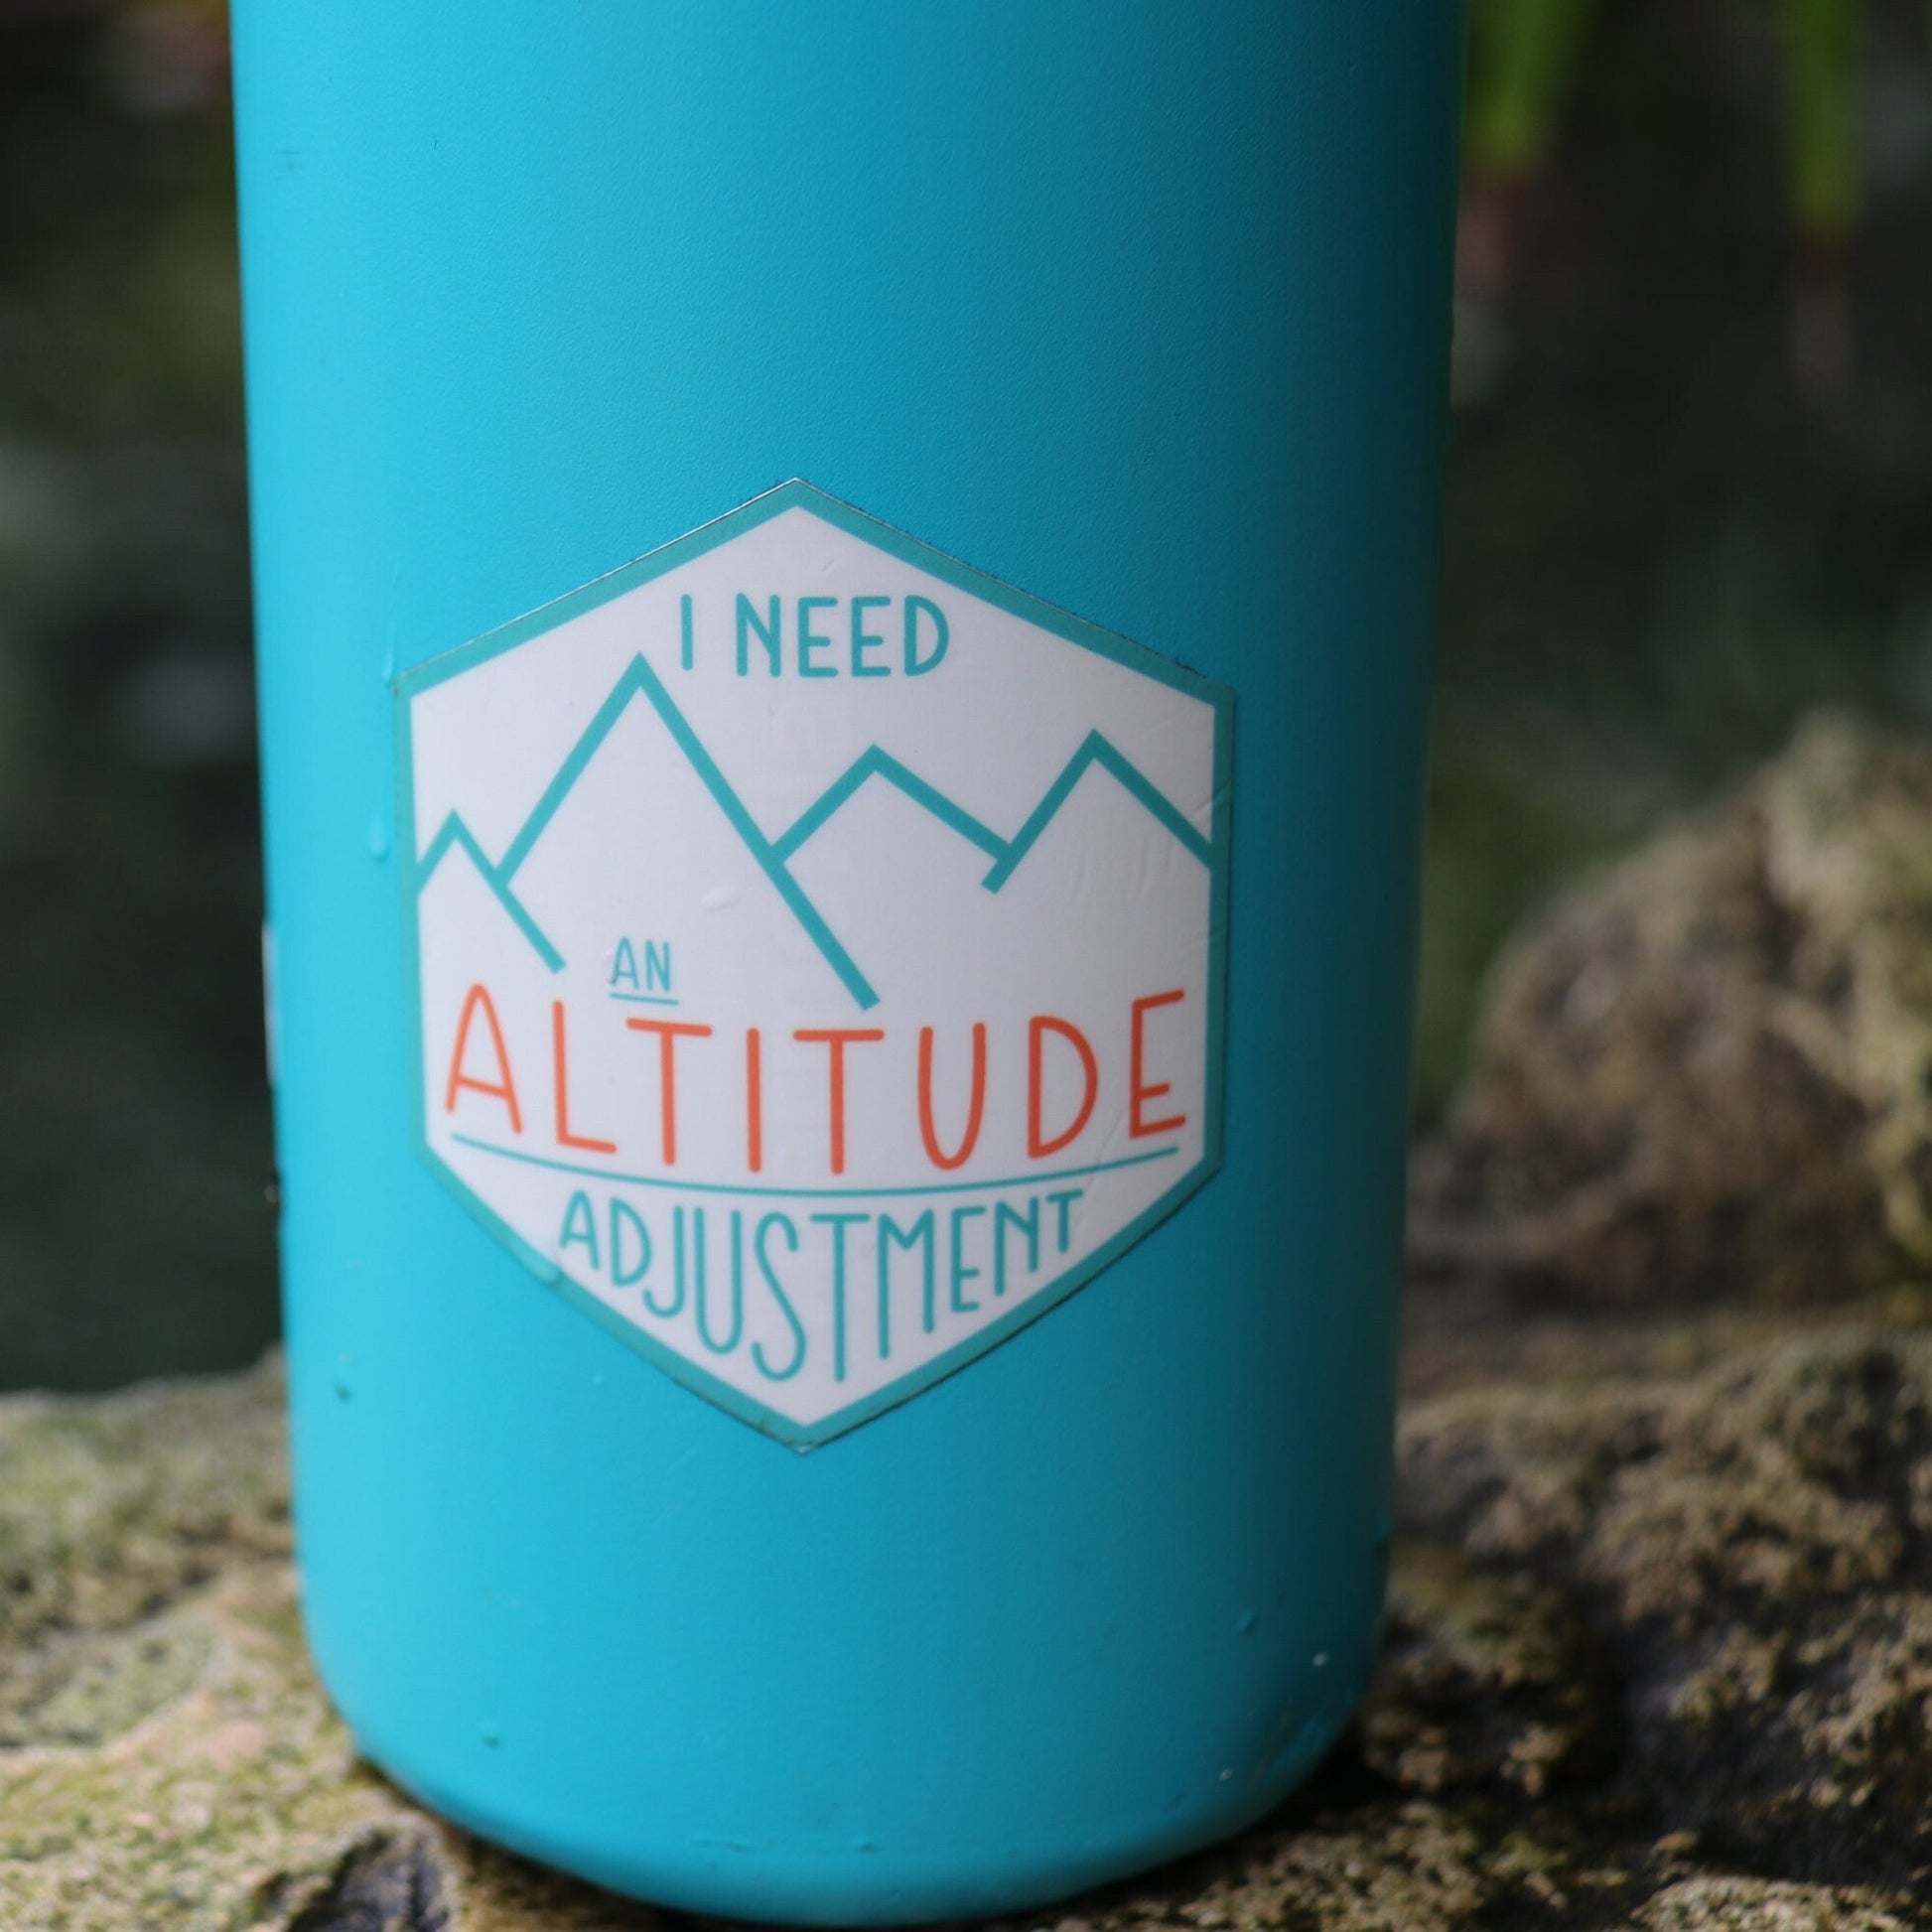 Waterproof Sticker with text "I need an altitude adjustment"